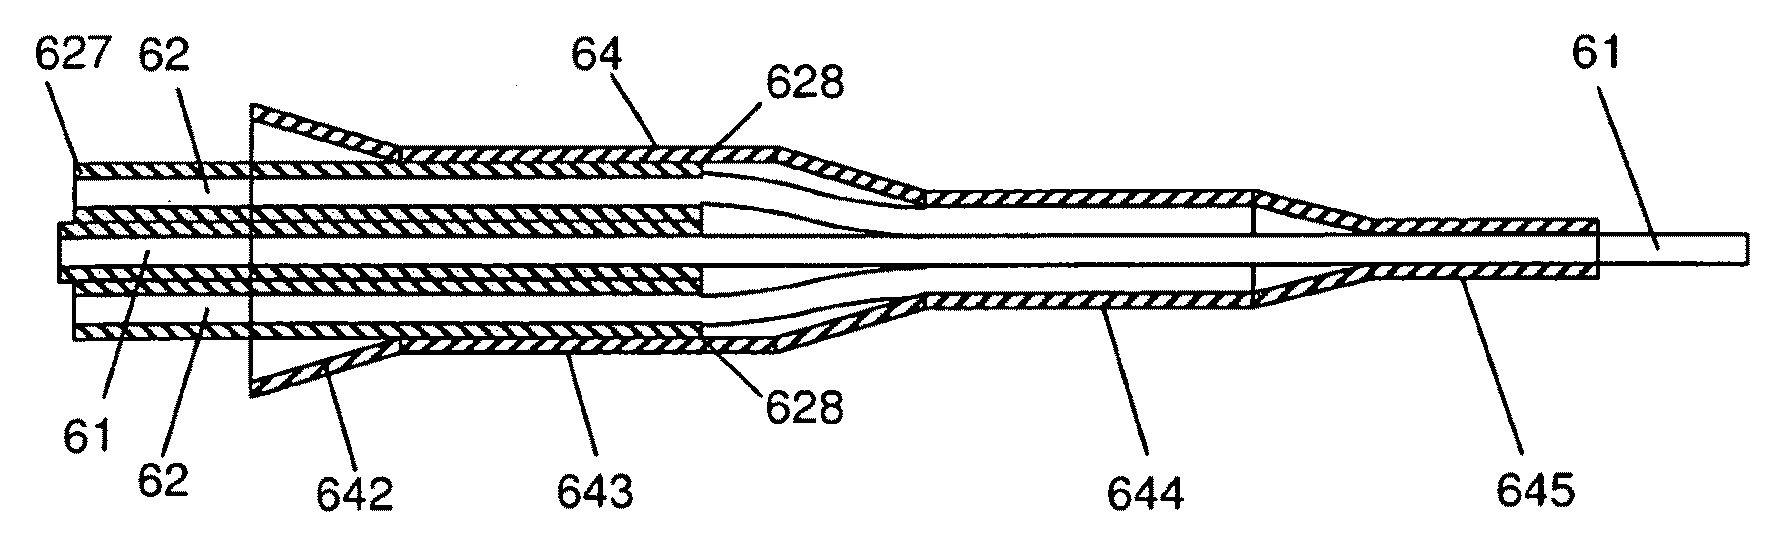 Optical coupler devices, methods of their production and use